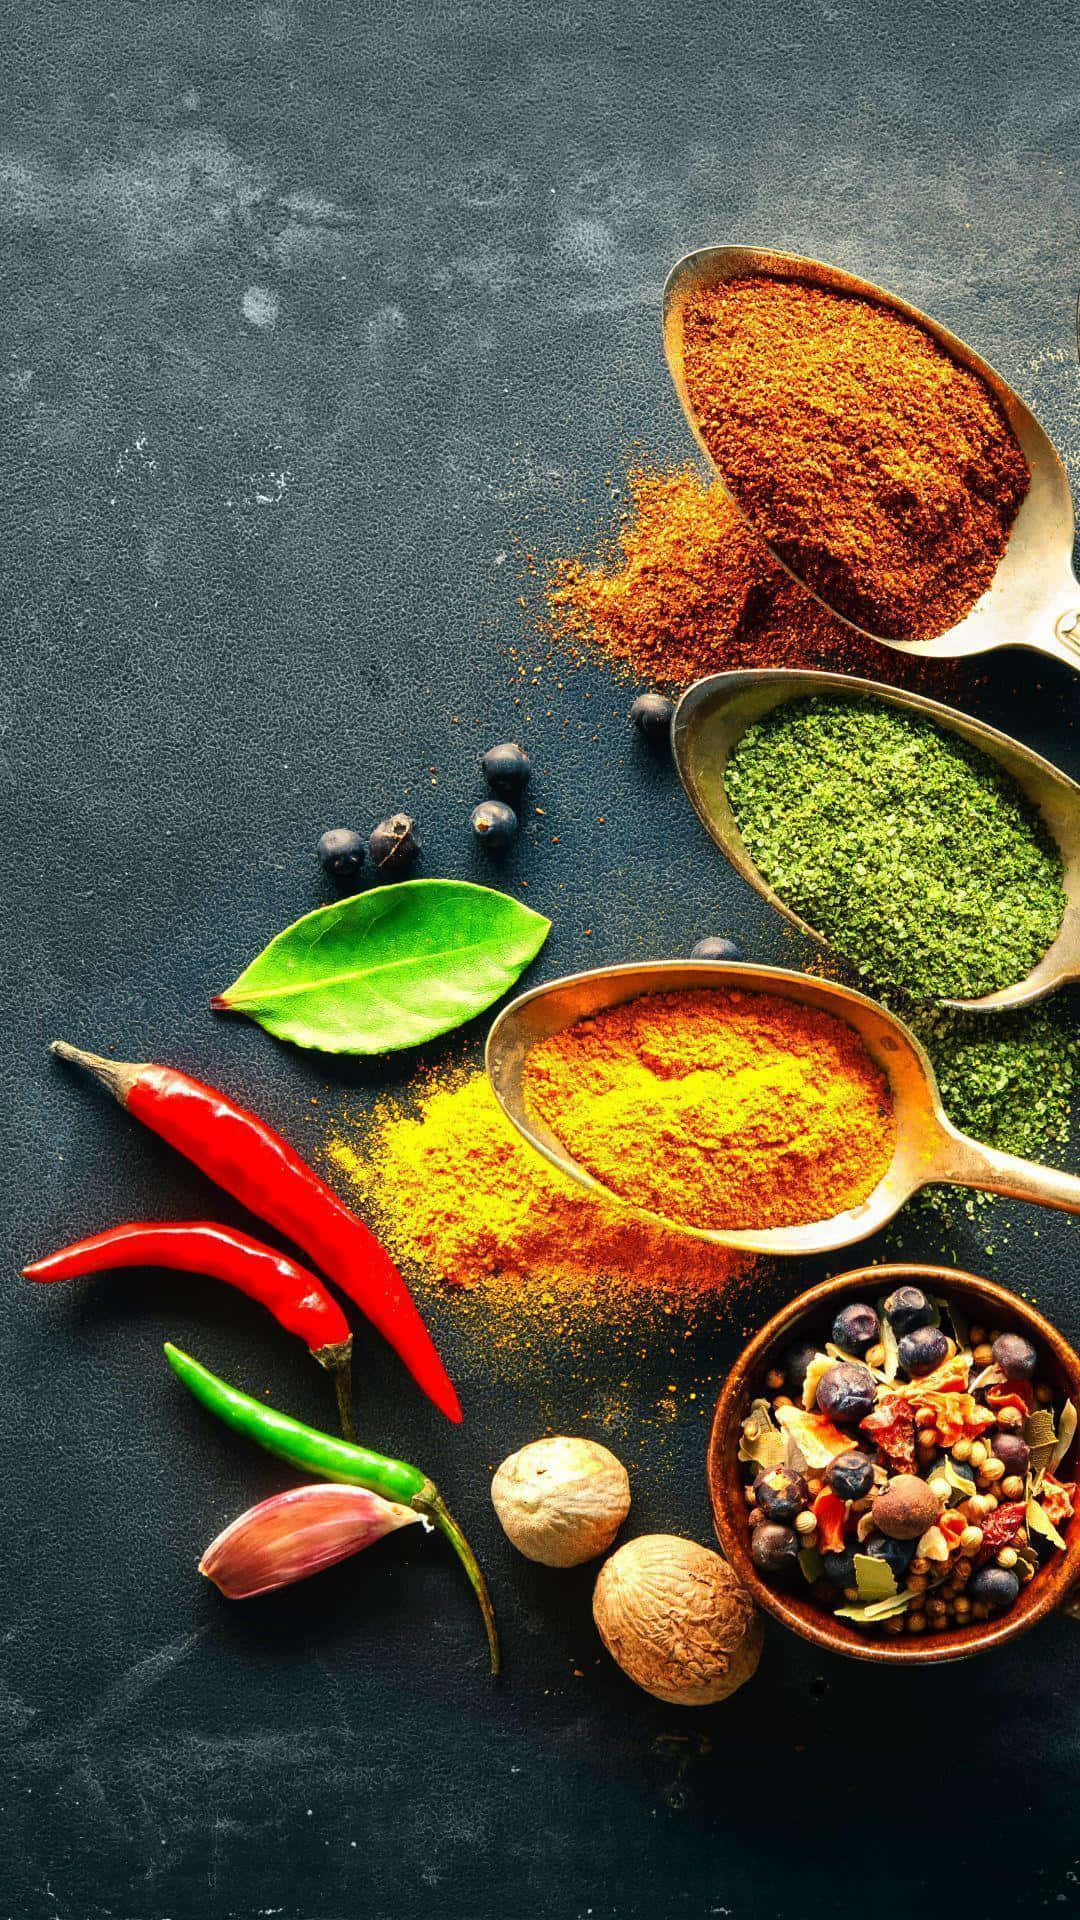 Immerse yourself in the tantalizing aroma and flavor of spices